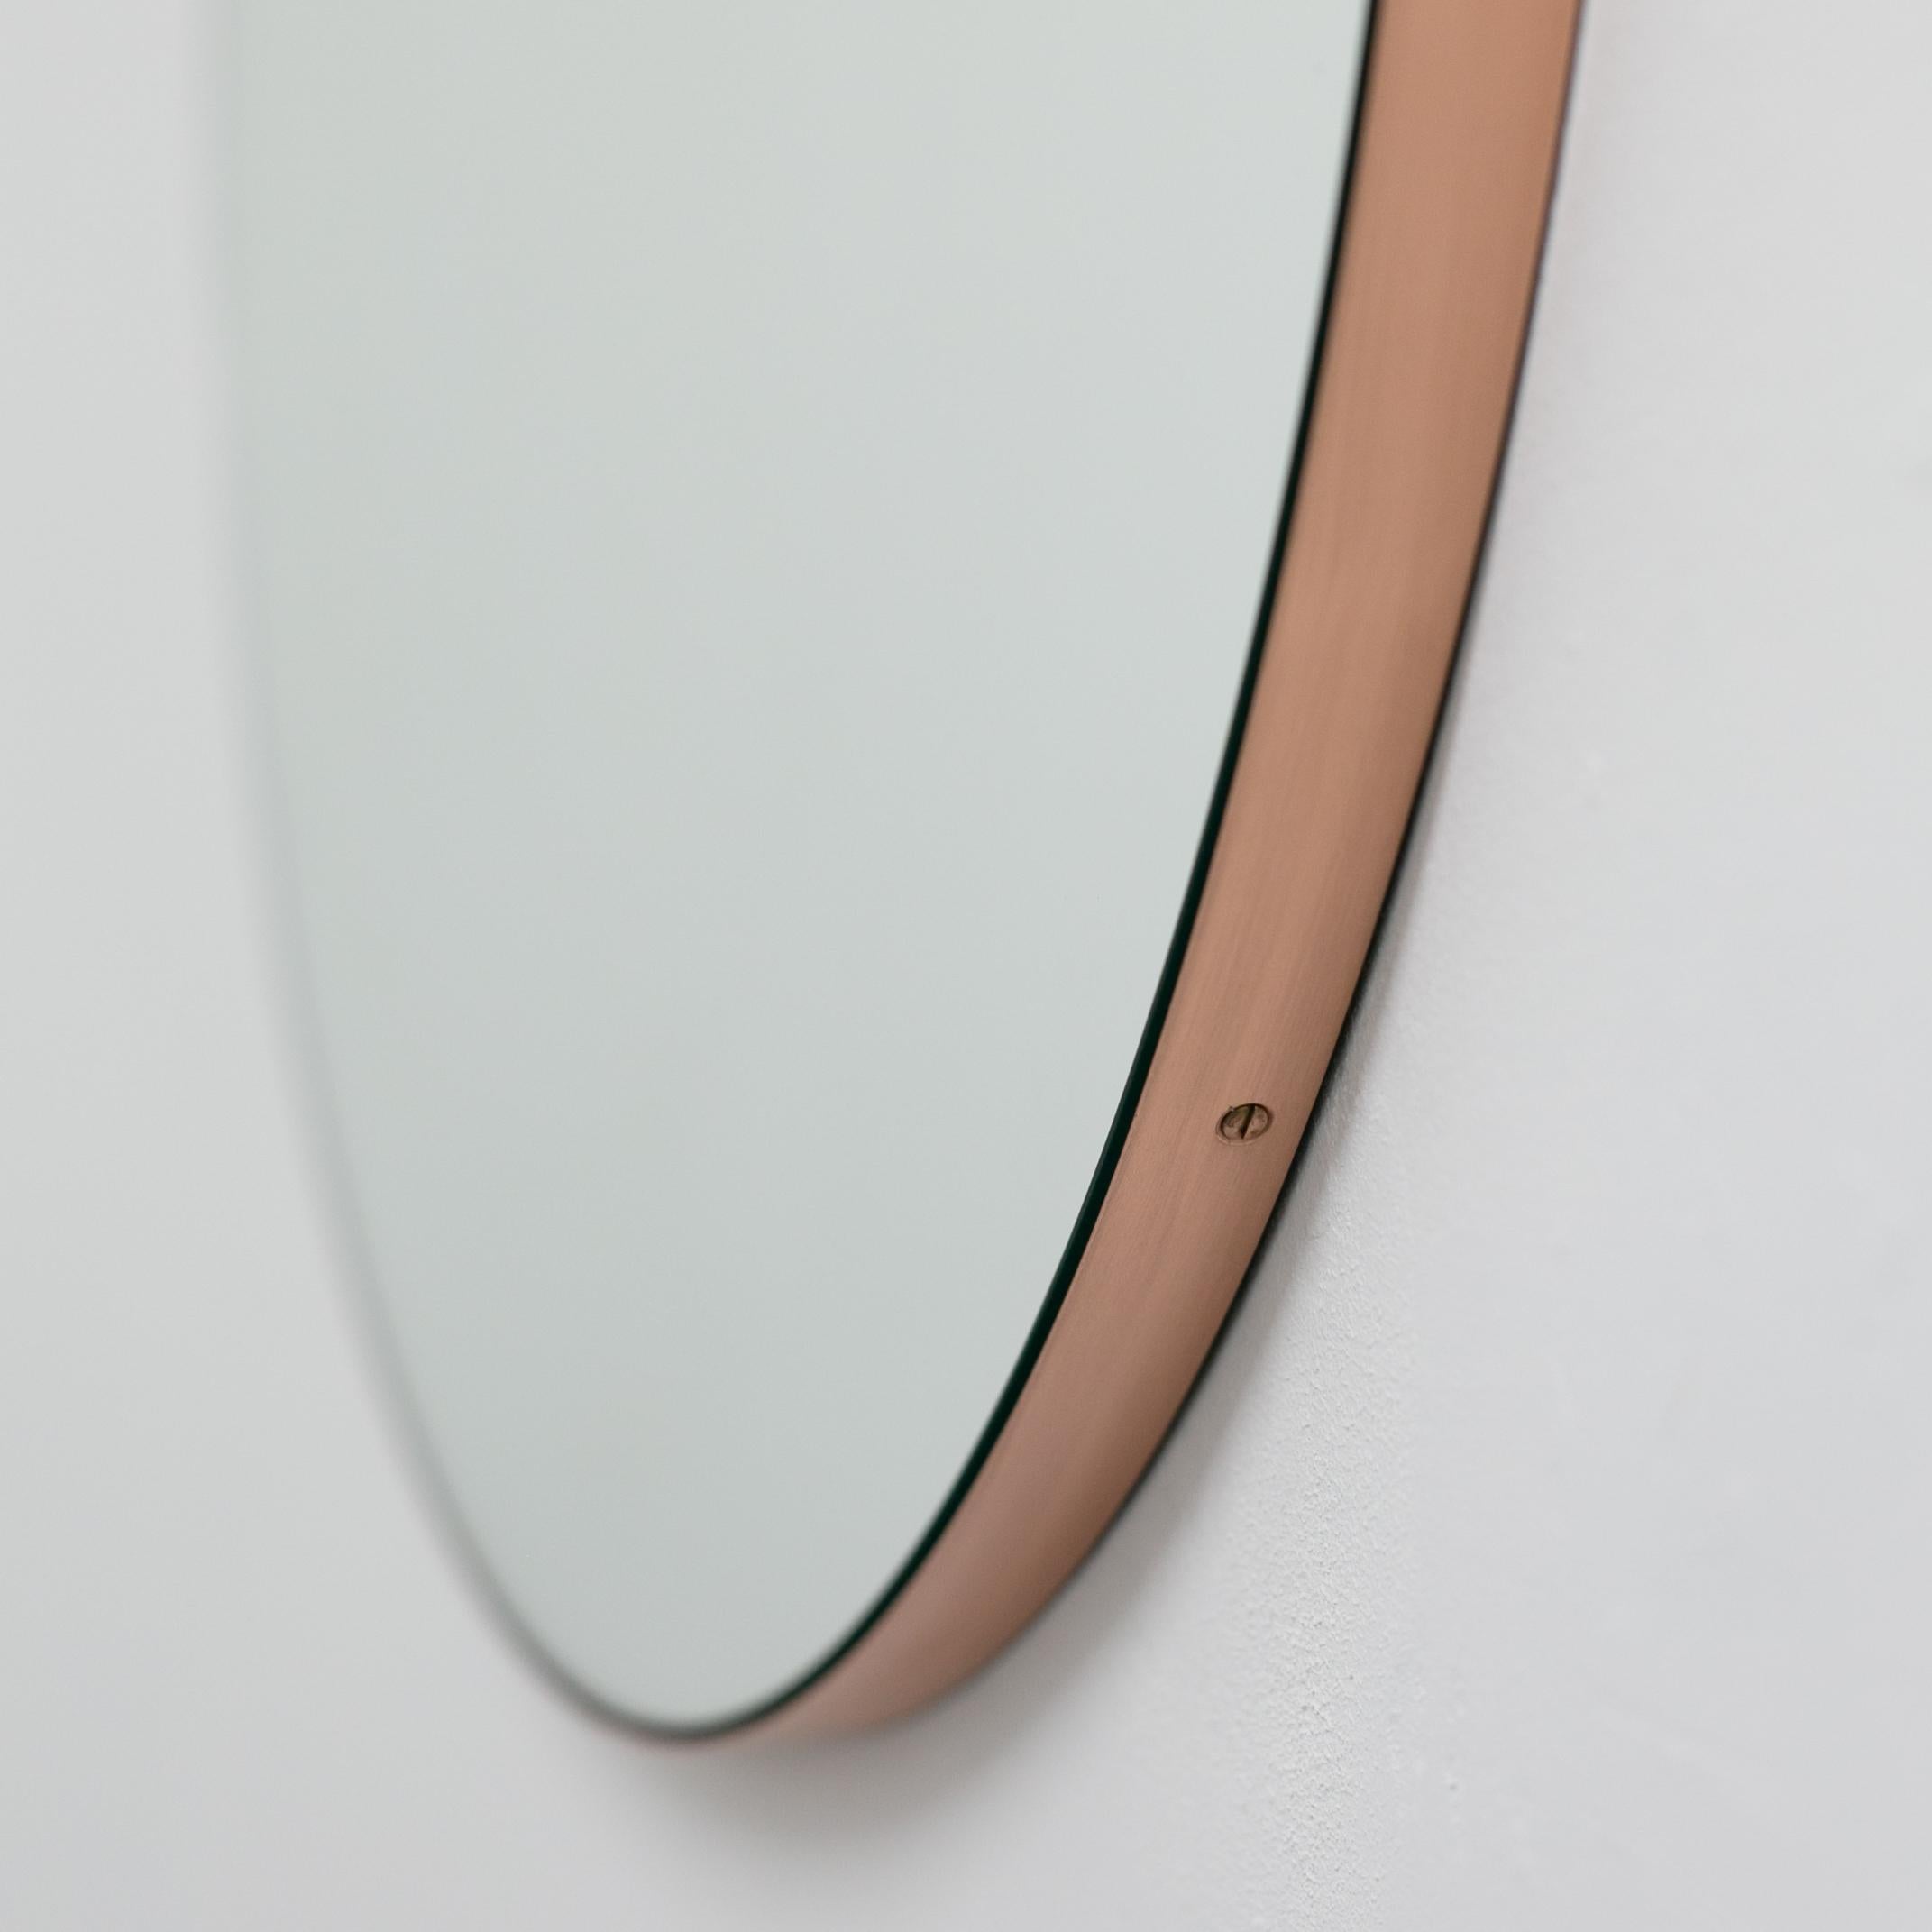 Orbis Round Modern Minimalist Handcrafted Mirror with Copper Frame, Large For Sale 4